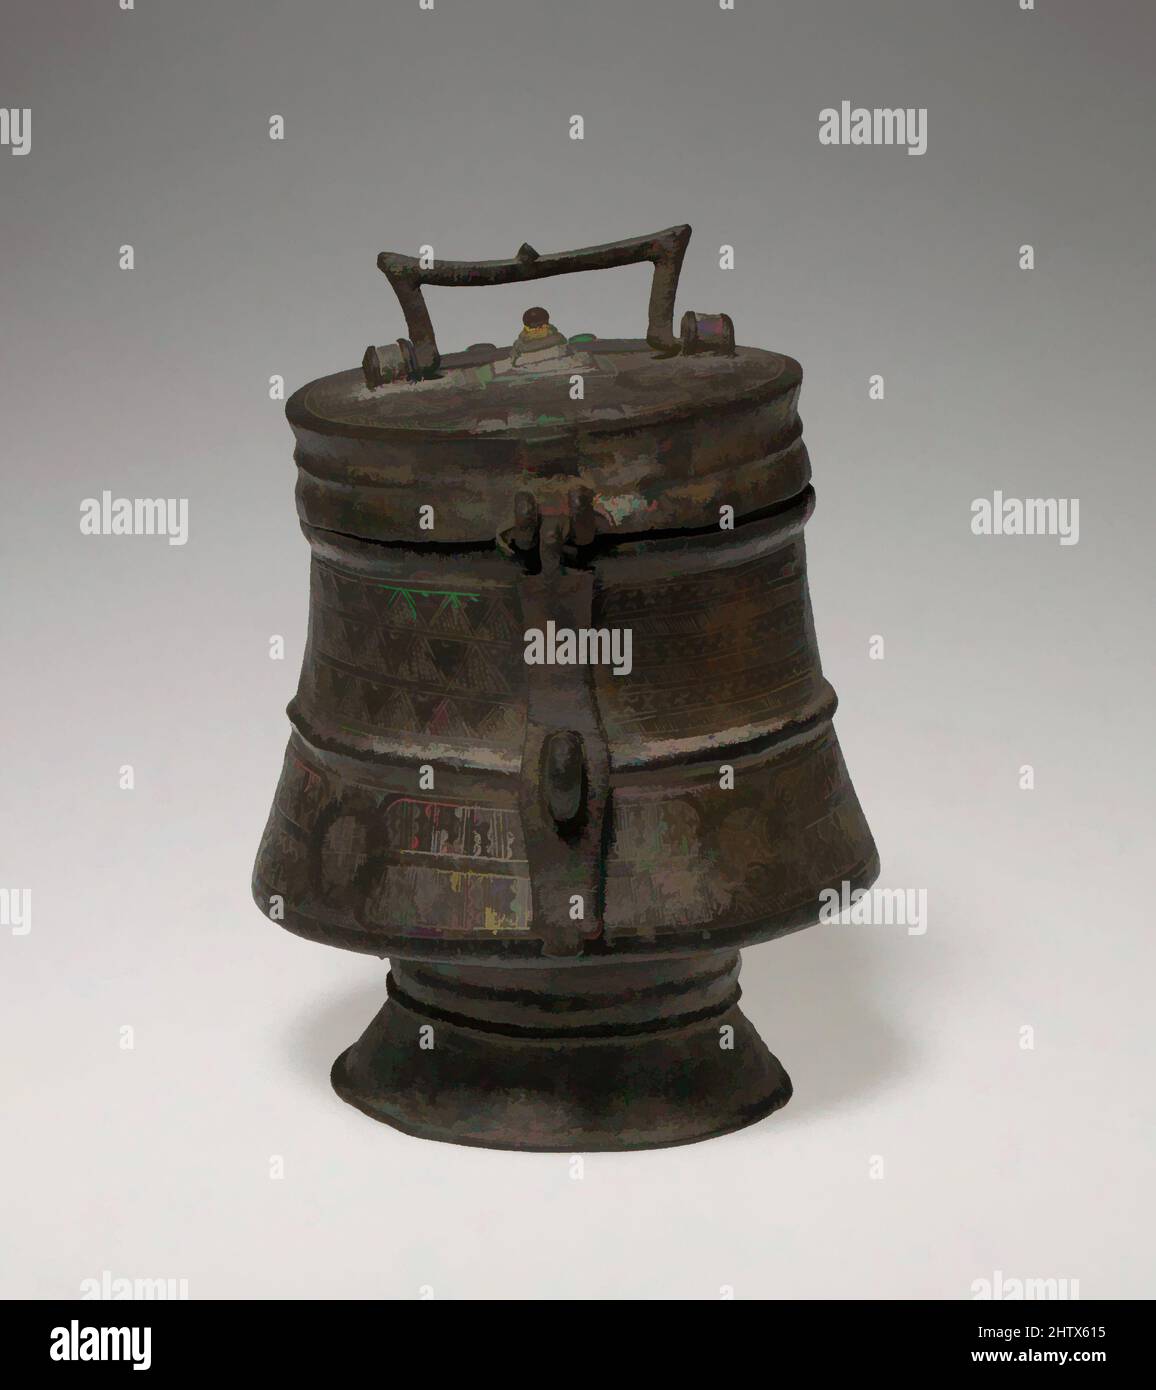 Art inspired by Lidded Vessel (Kuduo), 18th–19th century, Ghana, Akan peoples, Asante, Brass, pigment, H. 6 7/8 x Diam. 5 1/2 in. (17.5 x 14 cm), Metal-Containers, Ornate, cast brass vessels known as kuduo were the possessions of kings and courtiers in the Akan kingdoms. Gold dust and, Classic works modernized by Artotop with a splash of modernity. Shapes, color and value, eye-catching visual impact on art. Emotions through freedom of artworks in a contemporary way. A timeless message pursuing a wildly creative new direction. Artists turning to the digital medium and creating the Artotop NFT Stock Photo